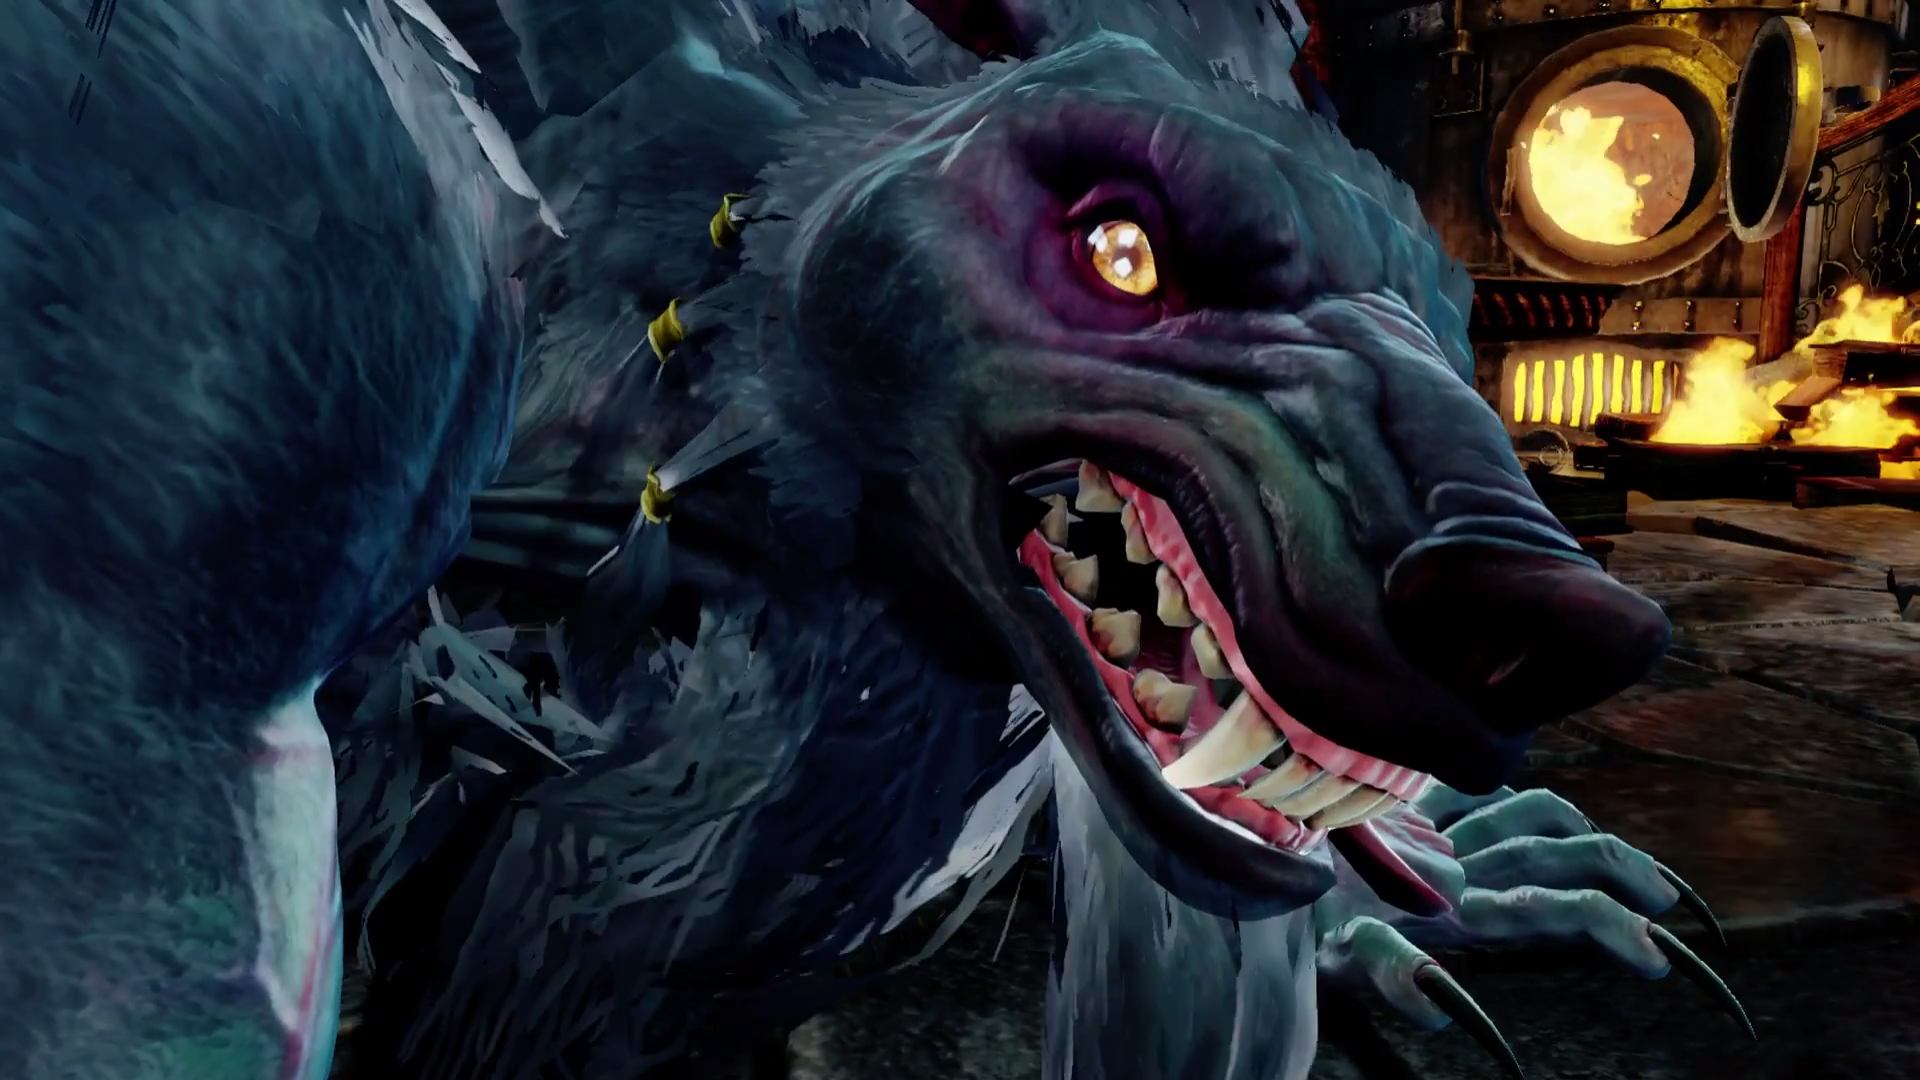 Sabrewulf S Uping Ultimate Highlighted In New Killer Instinct Video